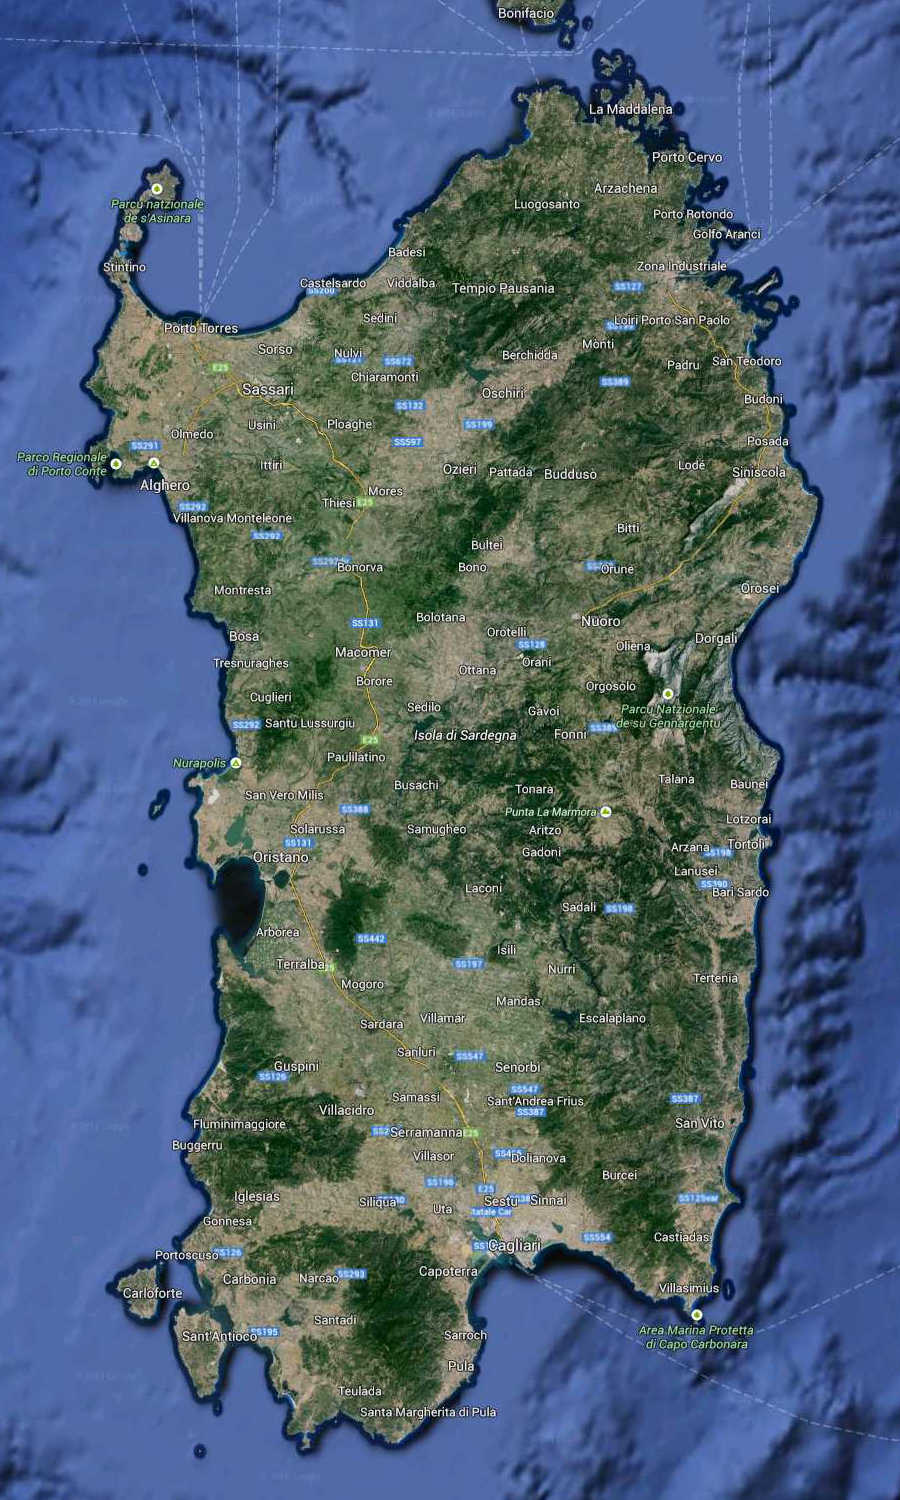 Sardinia Regione South Italy Map (Kindly in use by Google Maps)